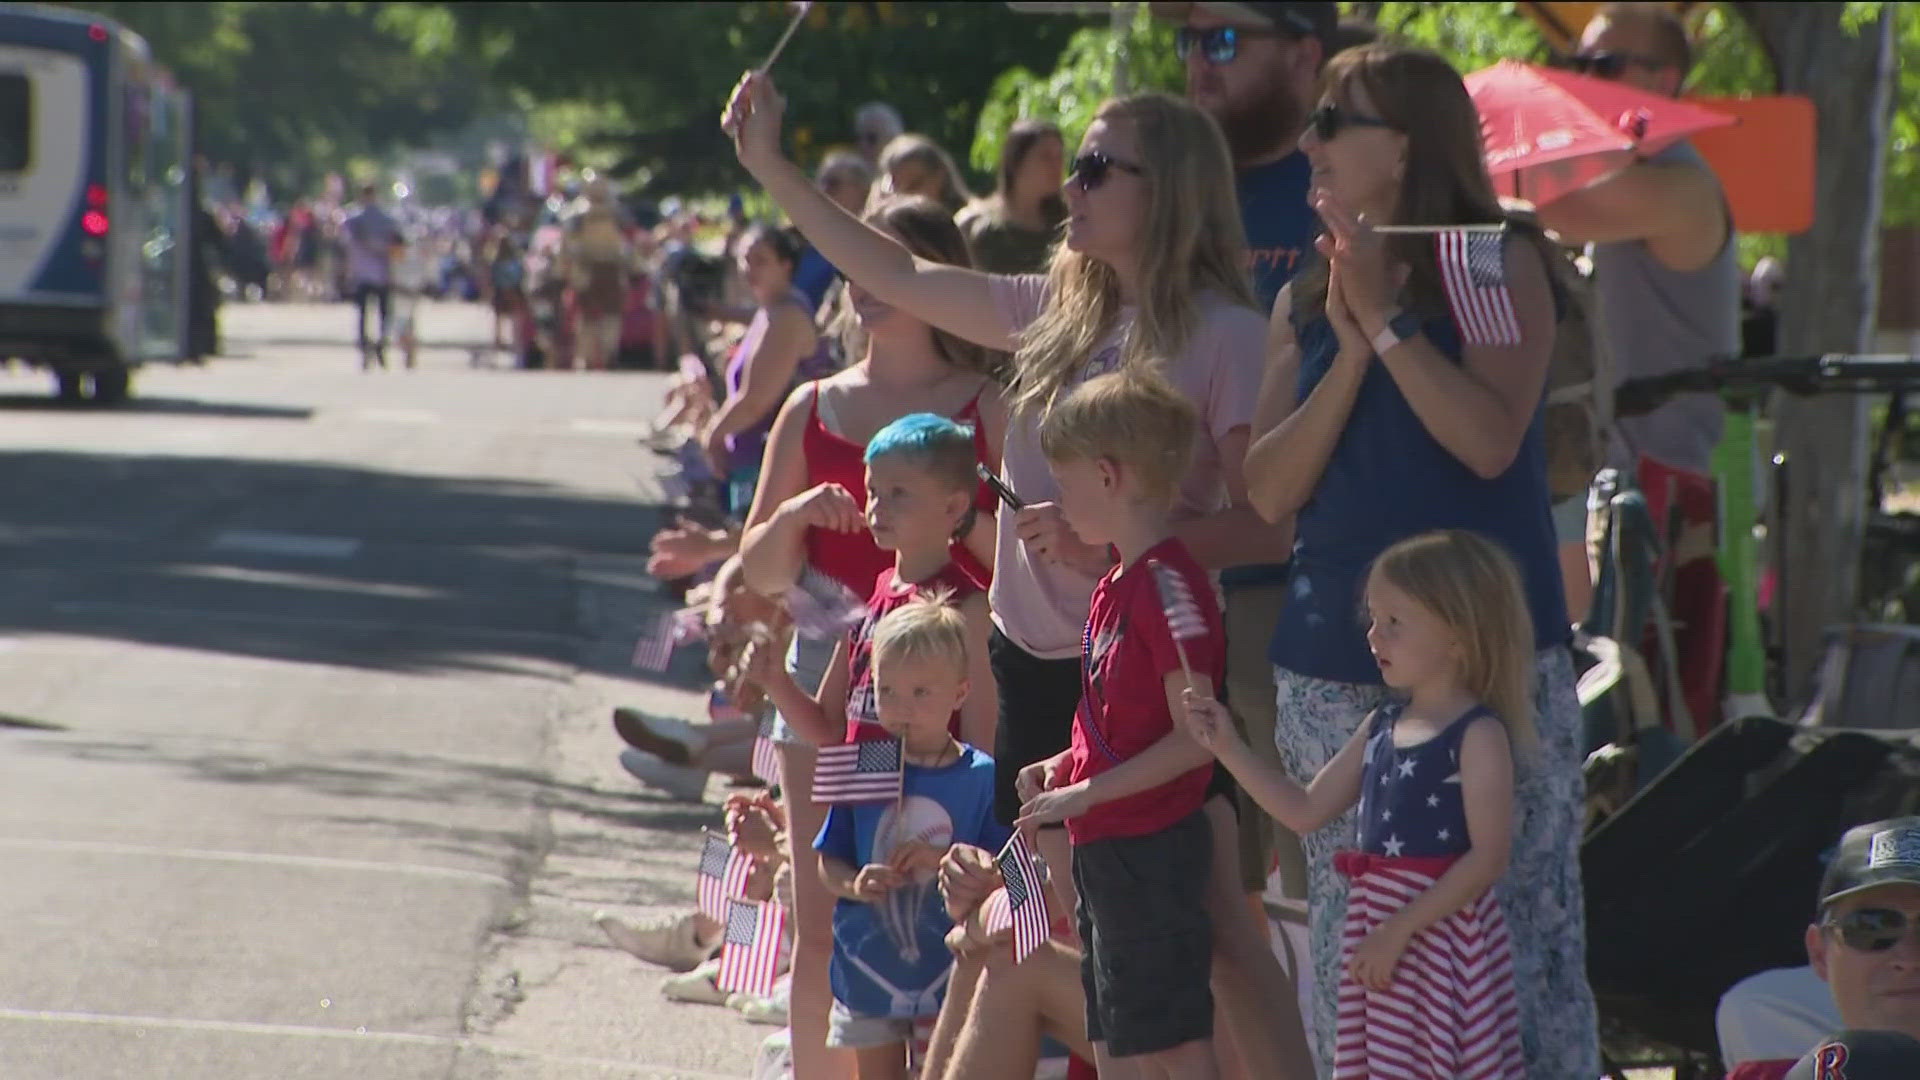 KTVB photojournalist Paul Boehlke showcases the sights and sounds of the annual Independence Day celebration in Idaho's capital city.